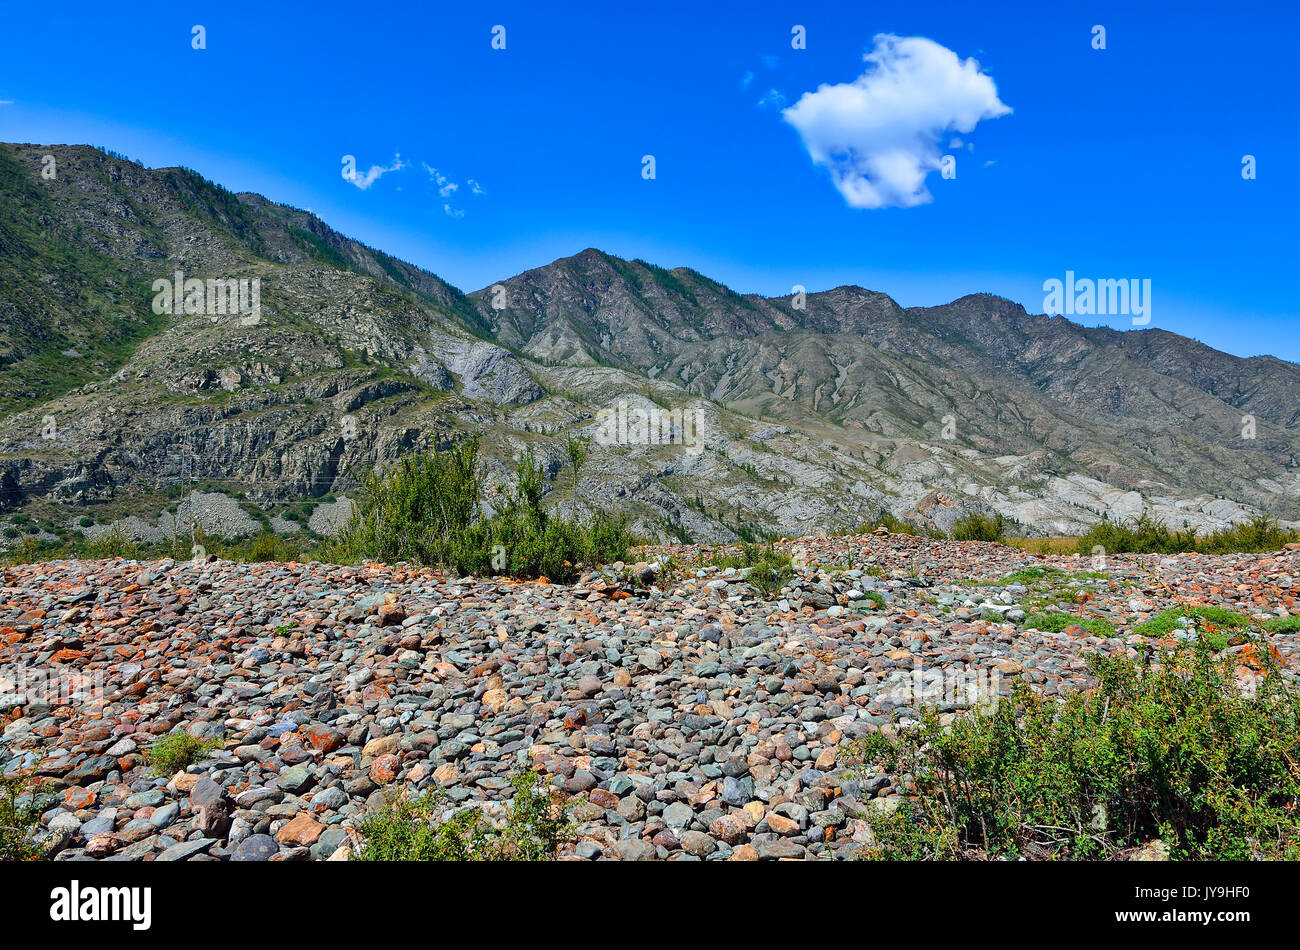 Sunny bright mountain landscape of Altai, Russia. Stony terrain with scanty vegetation, colorful stones and blue sky with white clouds Stock Photo